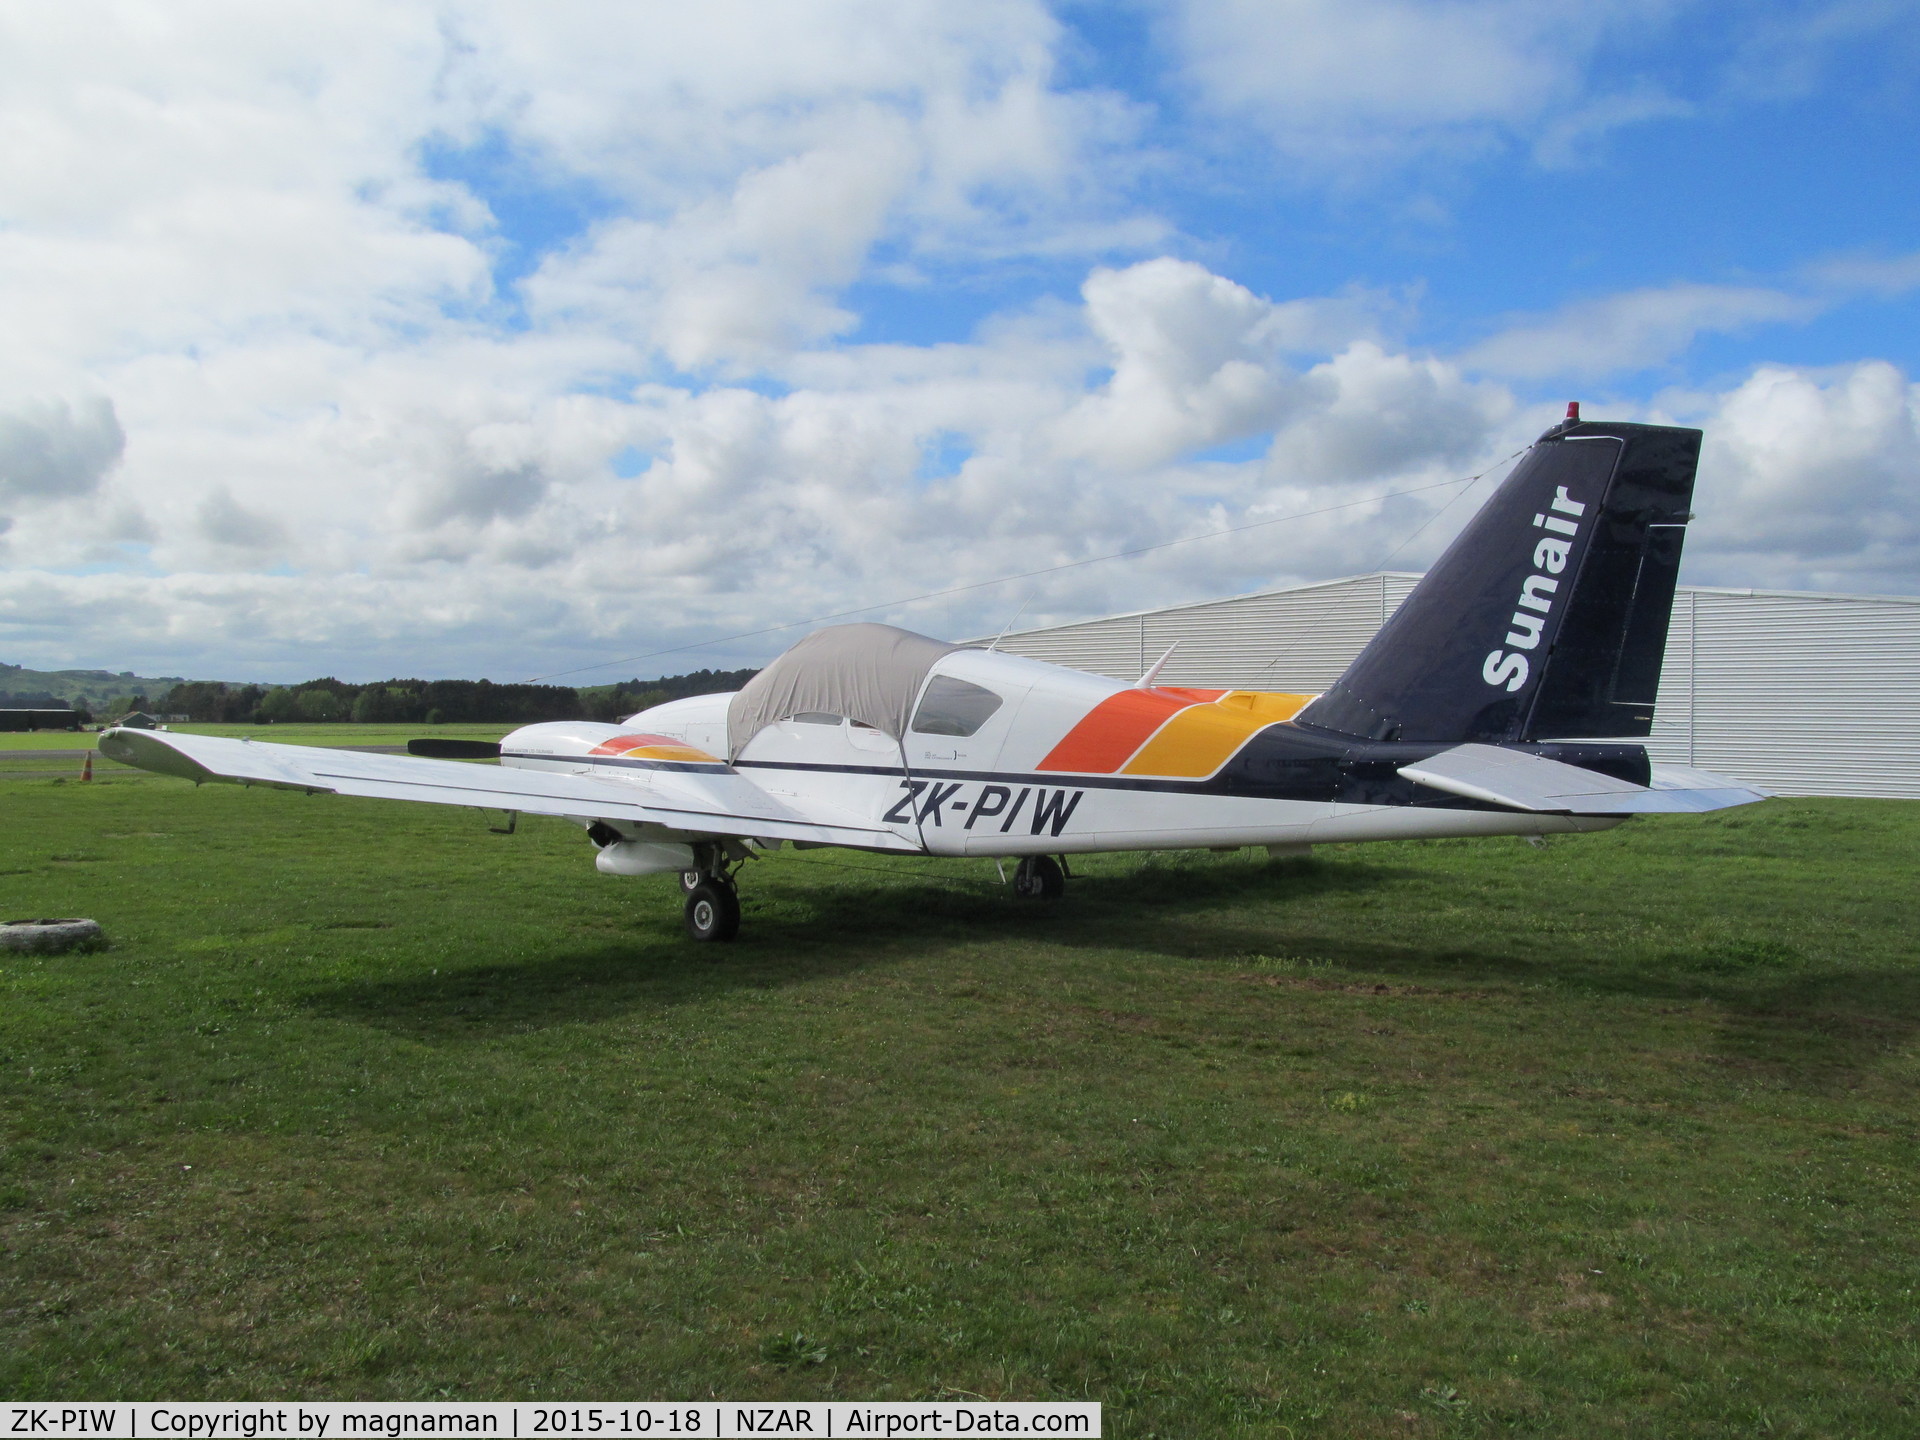 ZK-PIW, Piper PA-23-250 Aztec C/N 27-7305089, on grass at ardmore